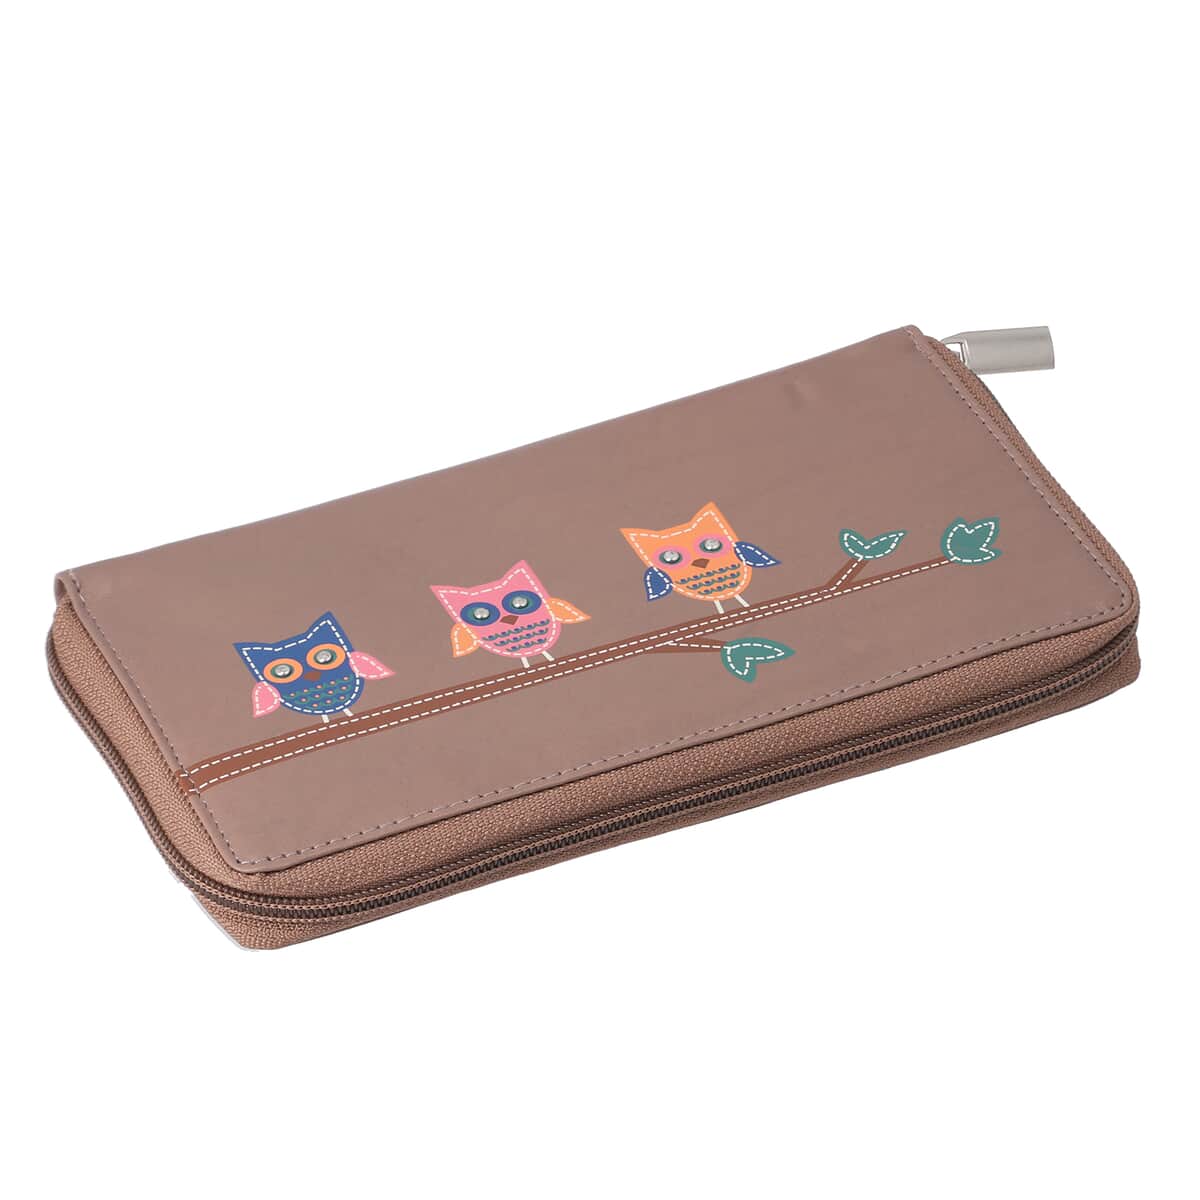 Union Code Mauve RFID Protected Genuine Leather Owl Family Applique Women's Wallet image number 5